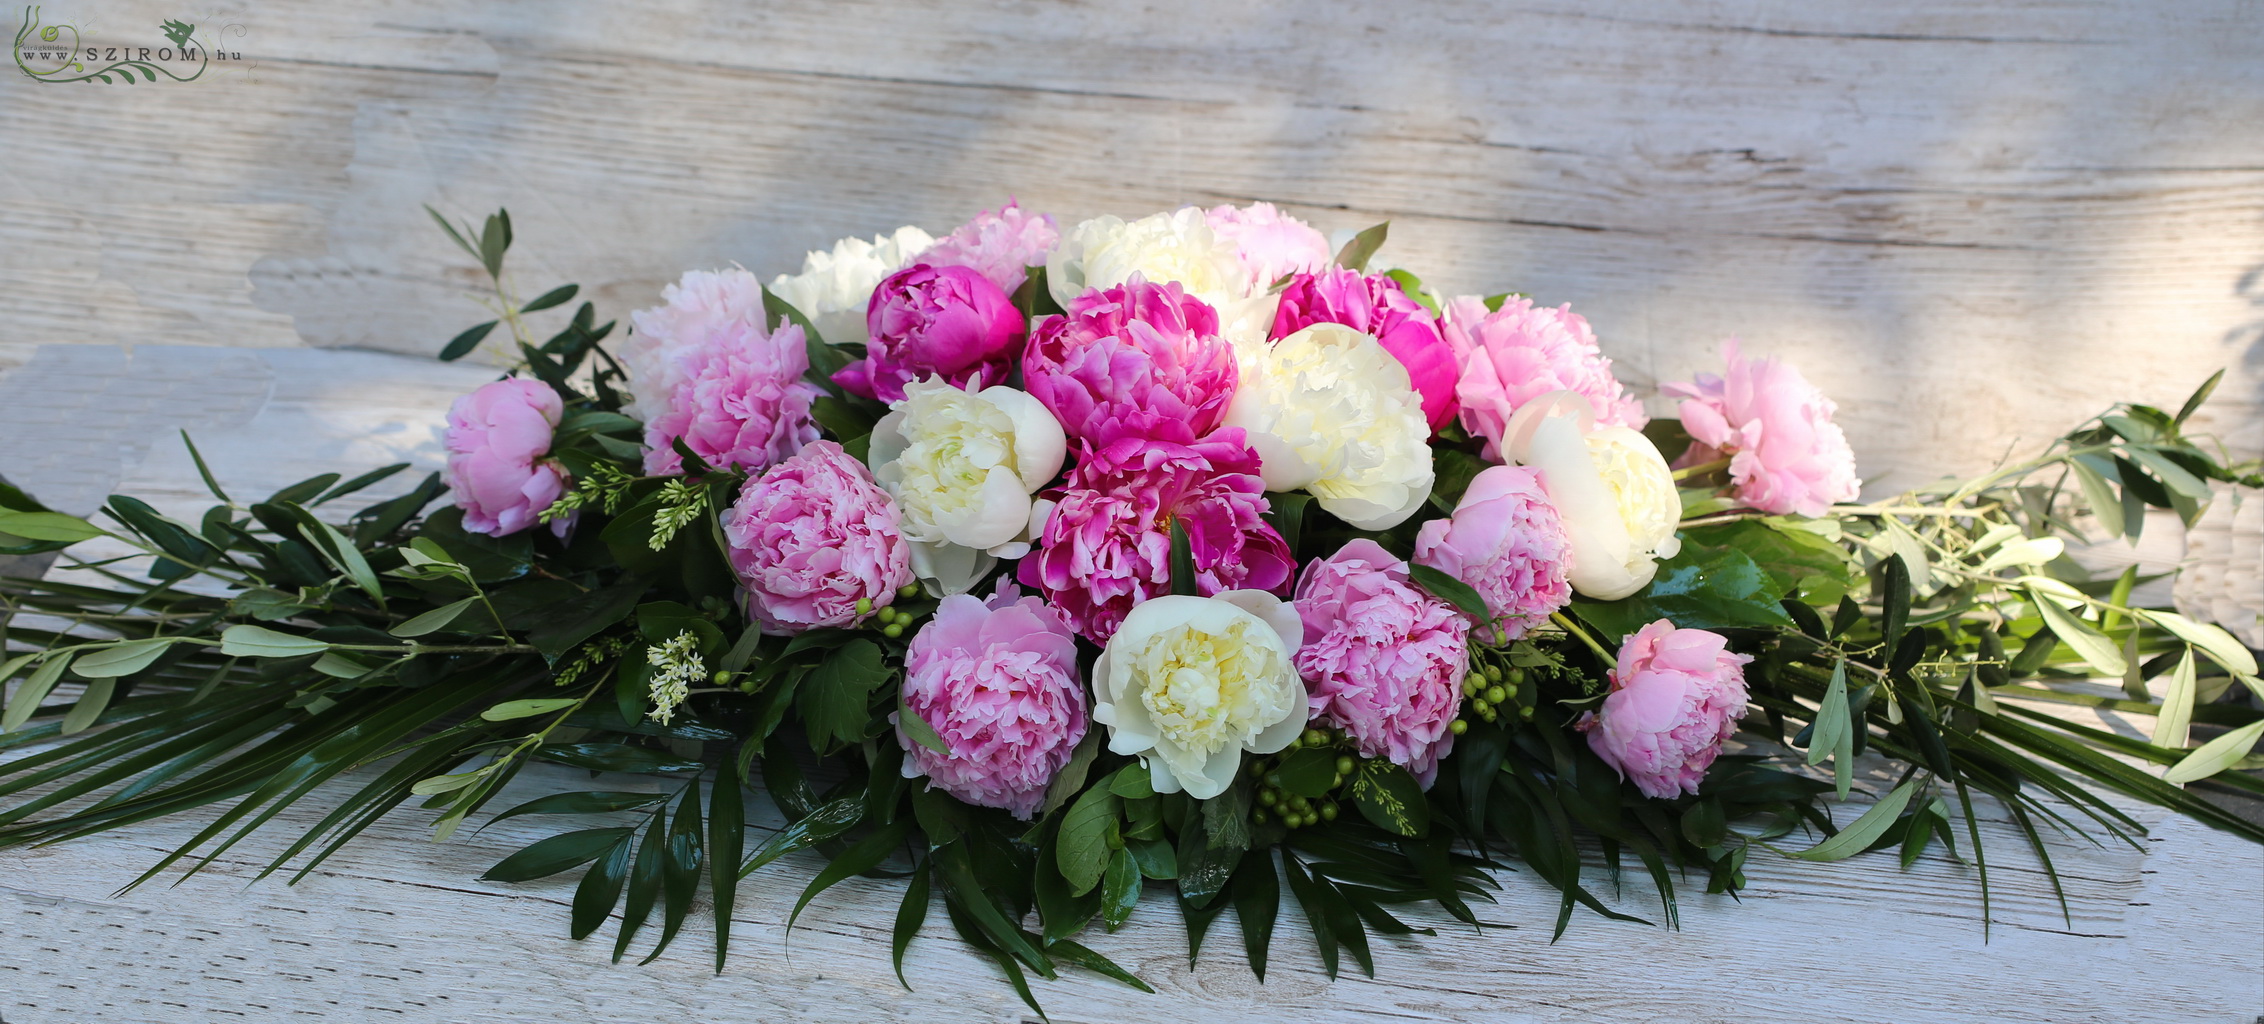 flower delivery Budapest - Wedding centerpiece with peonyes (pink, white)